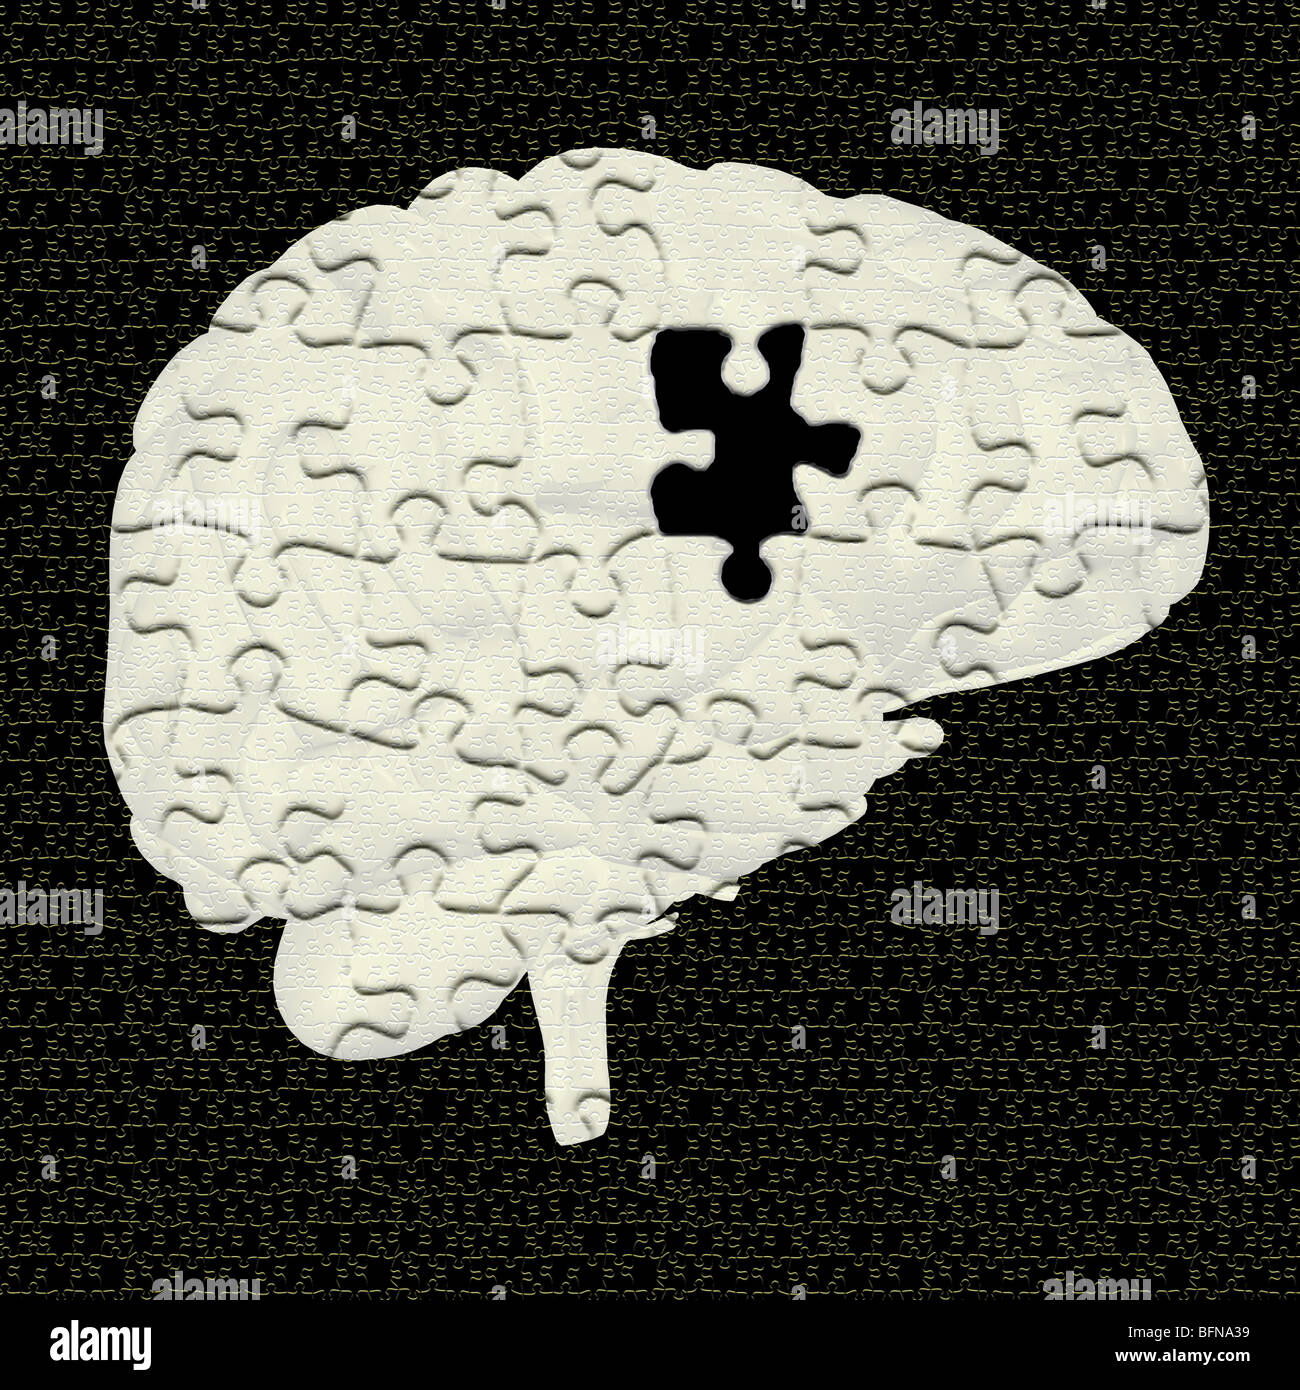 Illustration of the human brain depicted as a puzzle or mystery Stock Photo